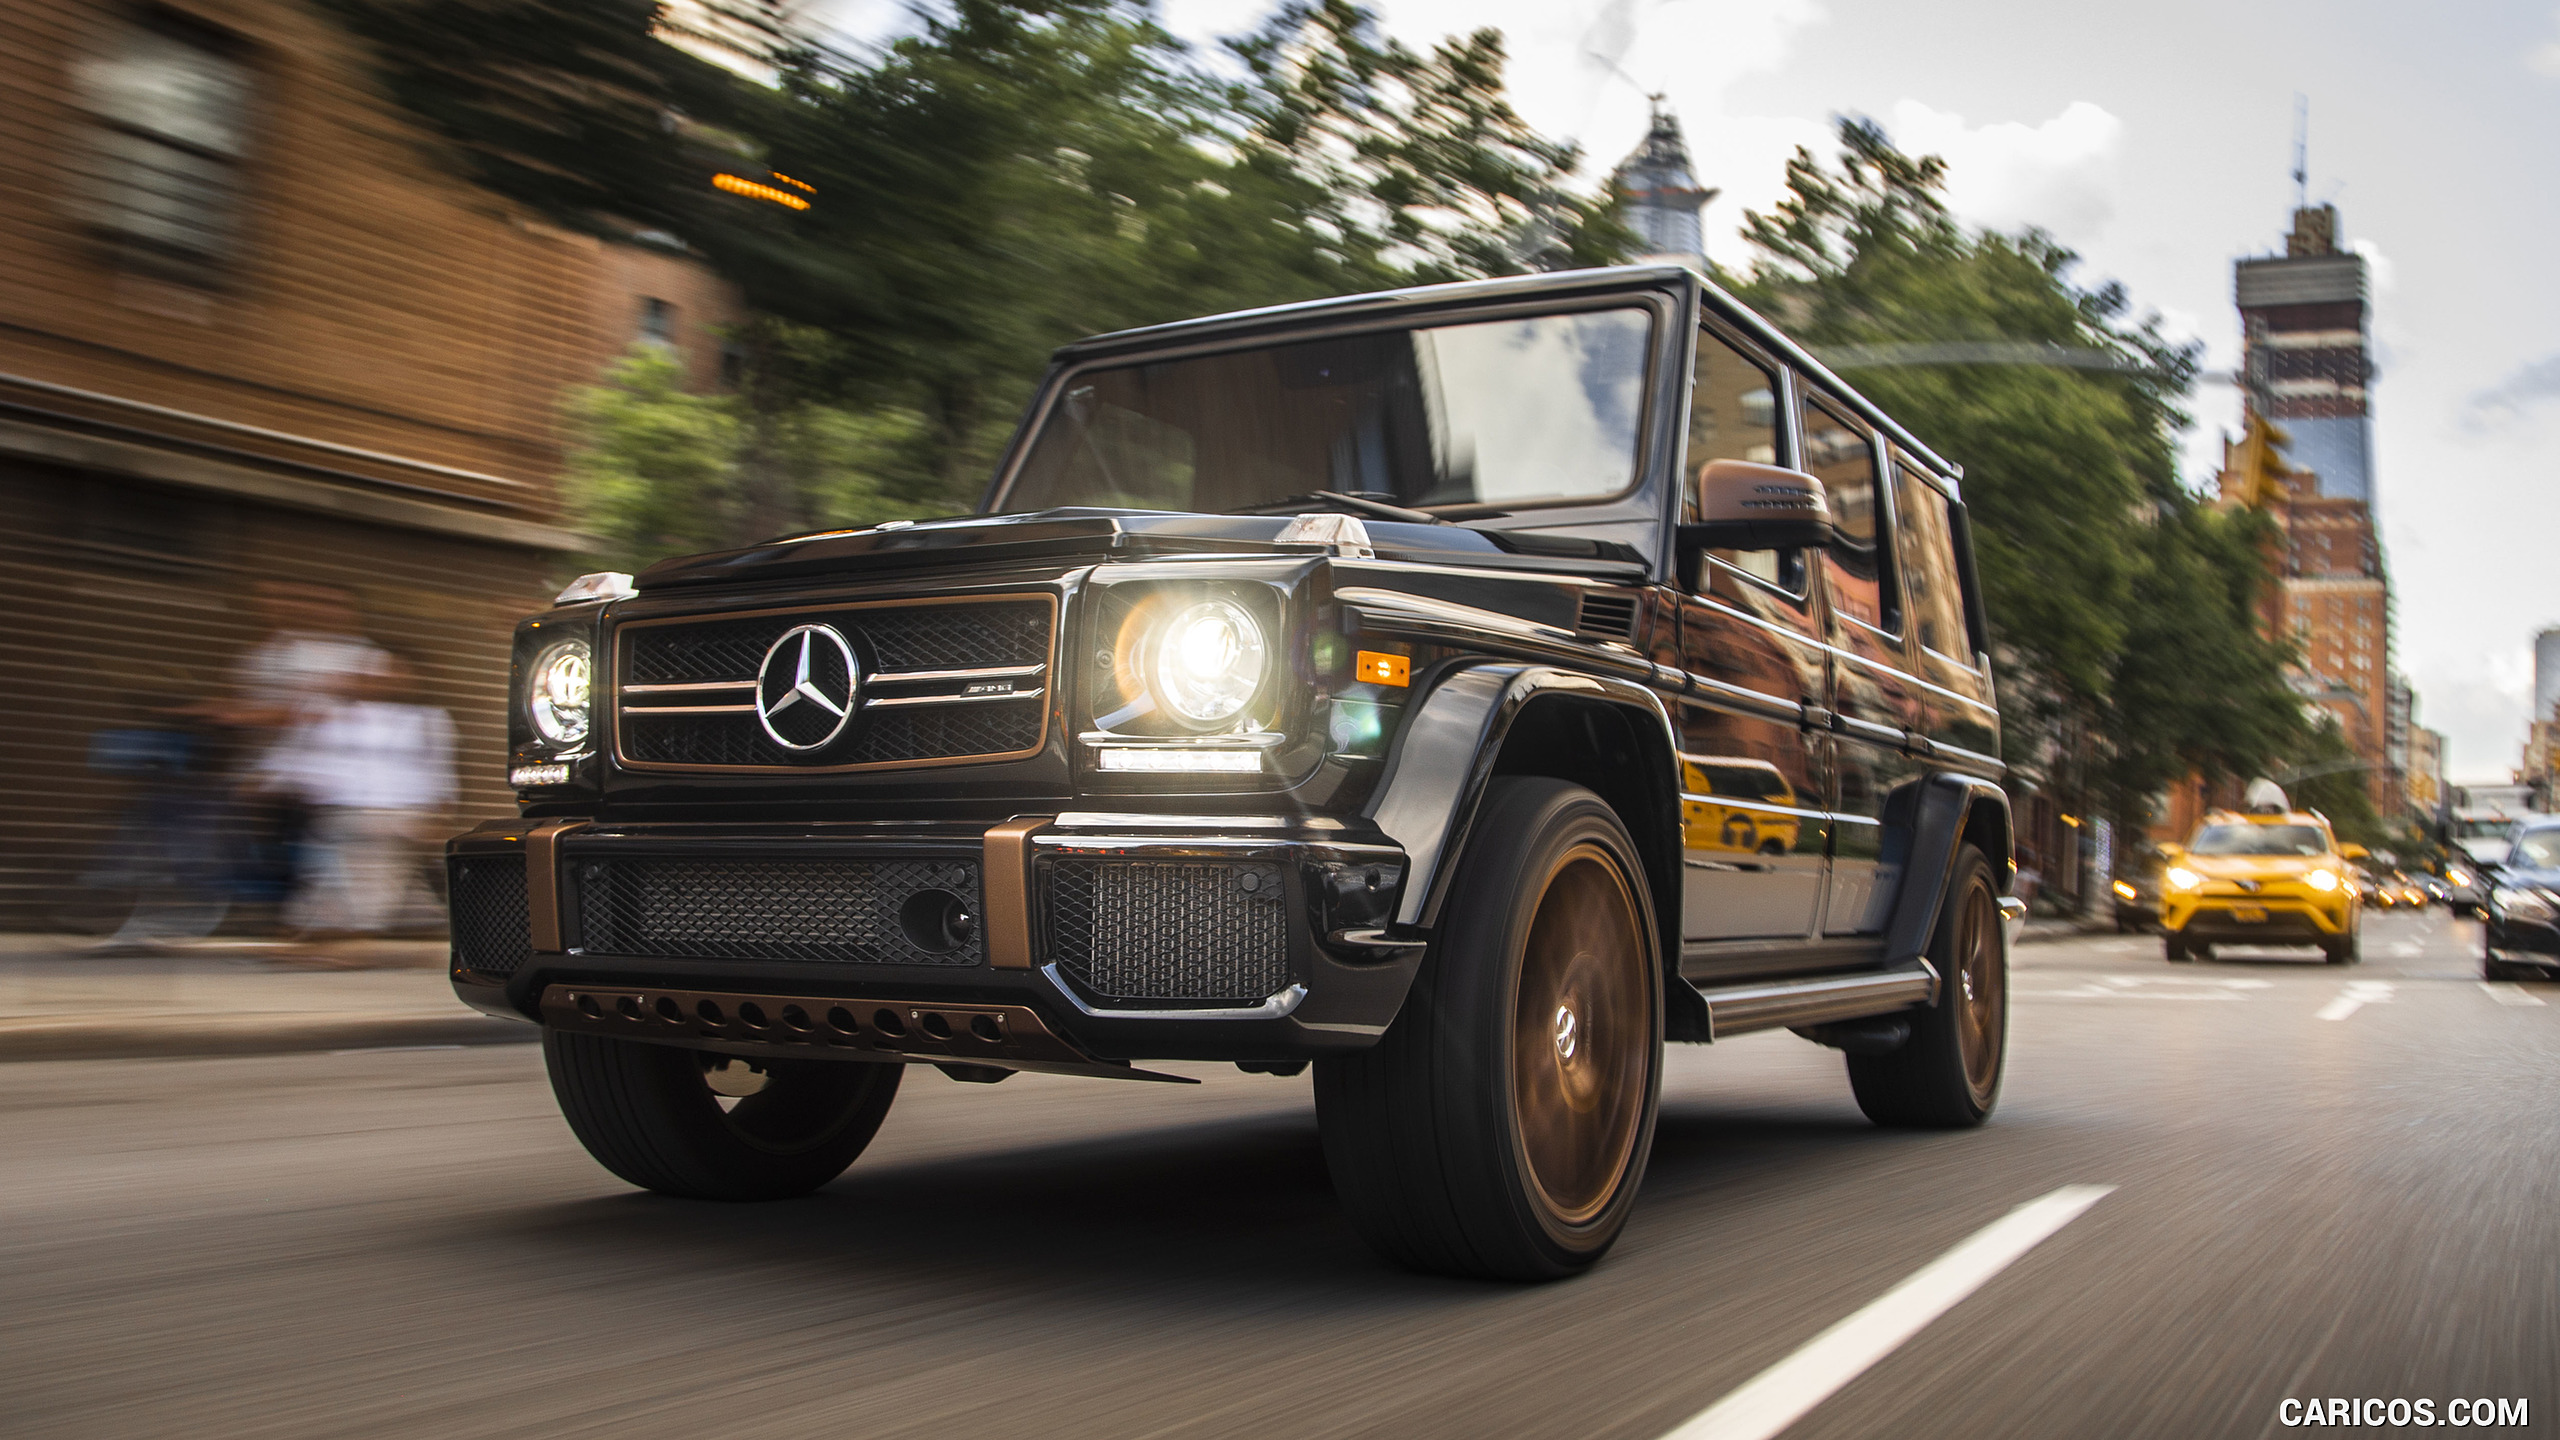 2018 Mercedes-AMG G65 Final Edition (US-Spec) - Front Three-Quarter, #26 of 70